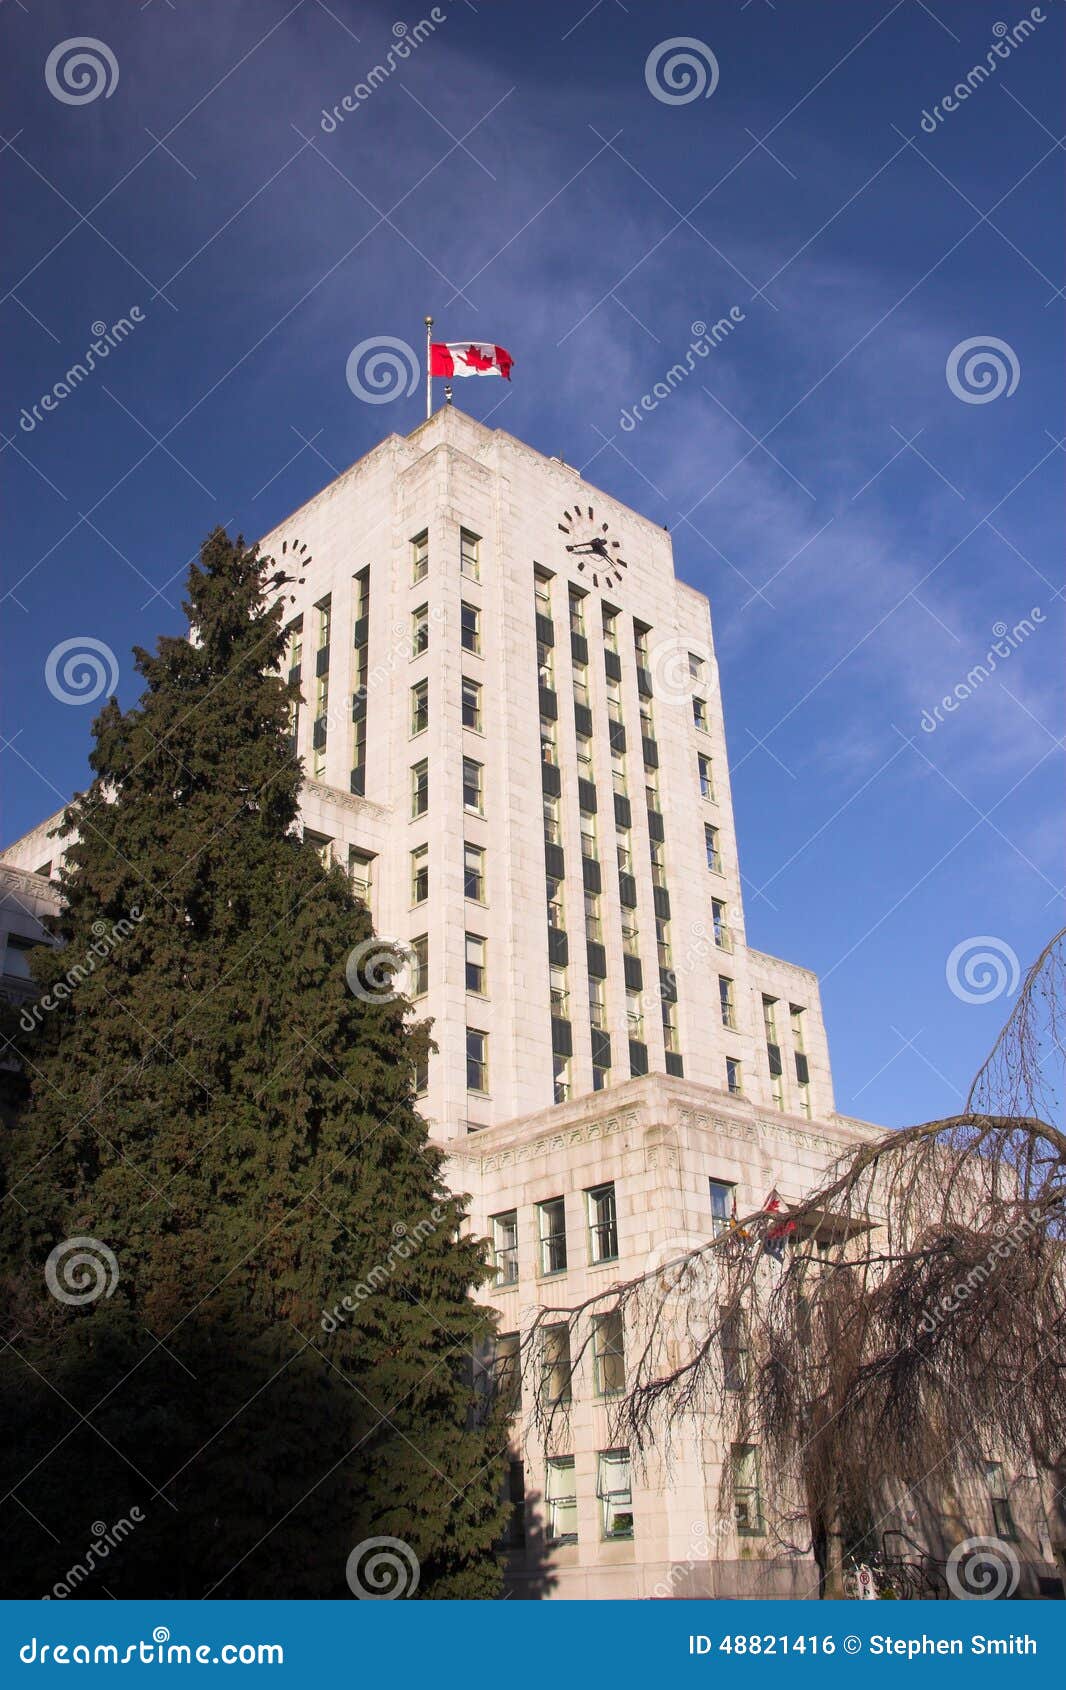 Vancouver City Hall with canada Flag standing proud on blue sky - Vancouver BC